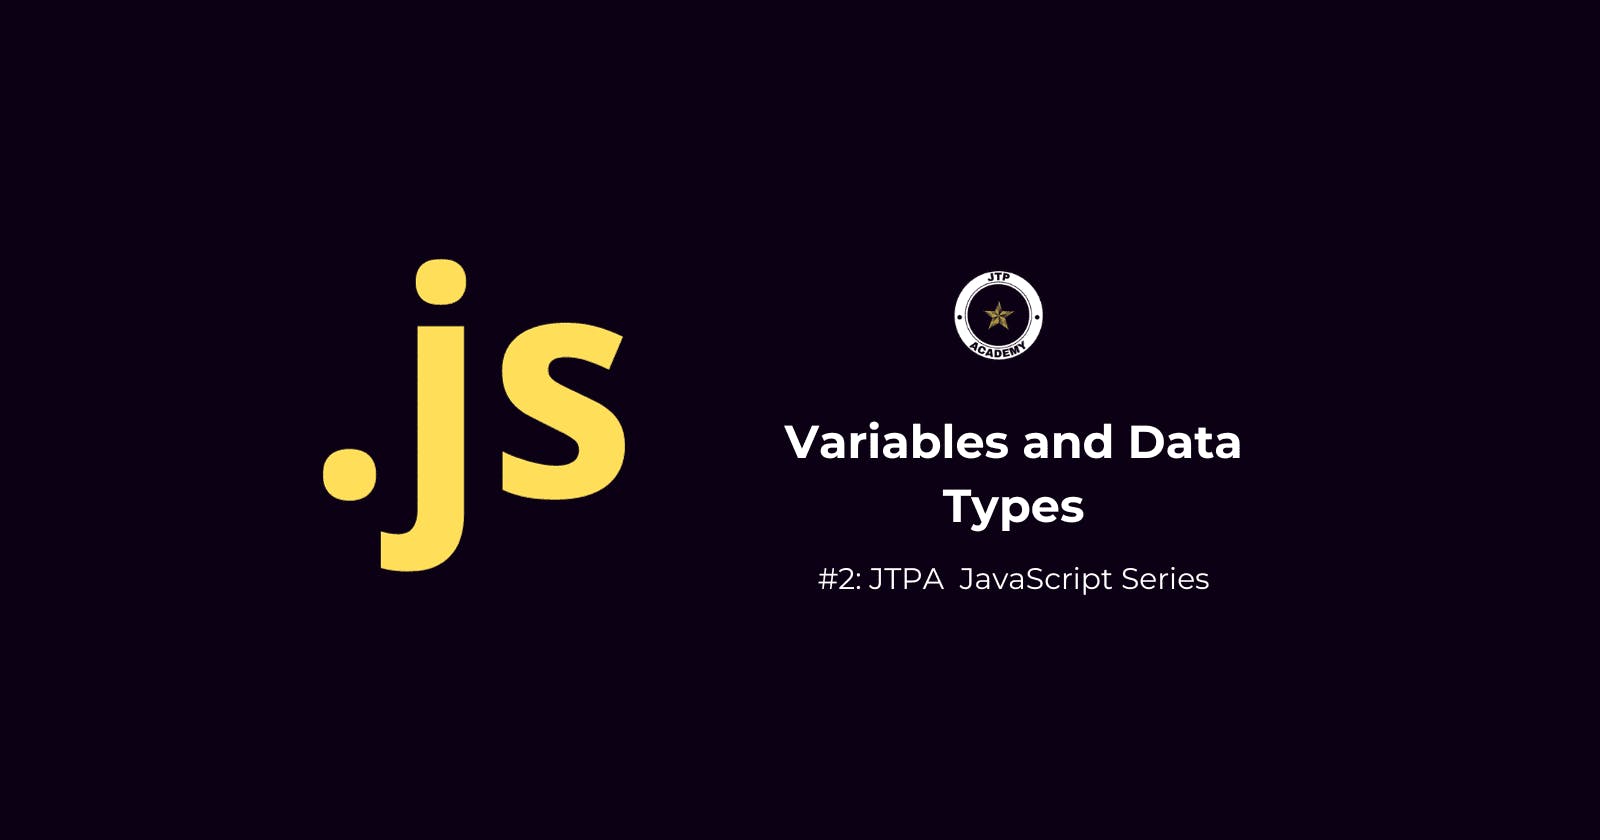 Mastering JavaScript Basics: A Hands-On Guide to Variables and Data Types